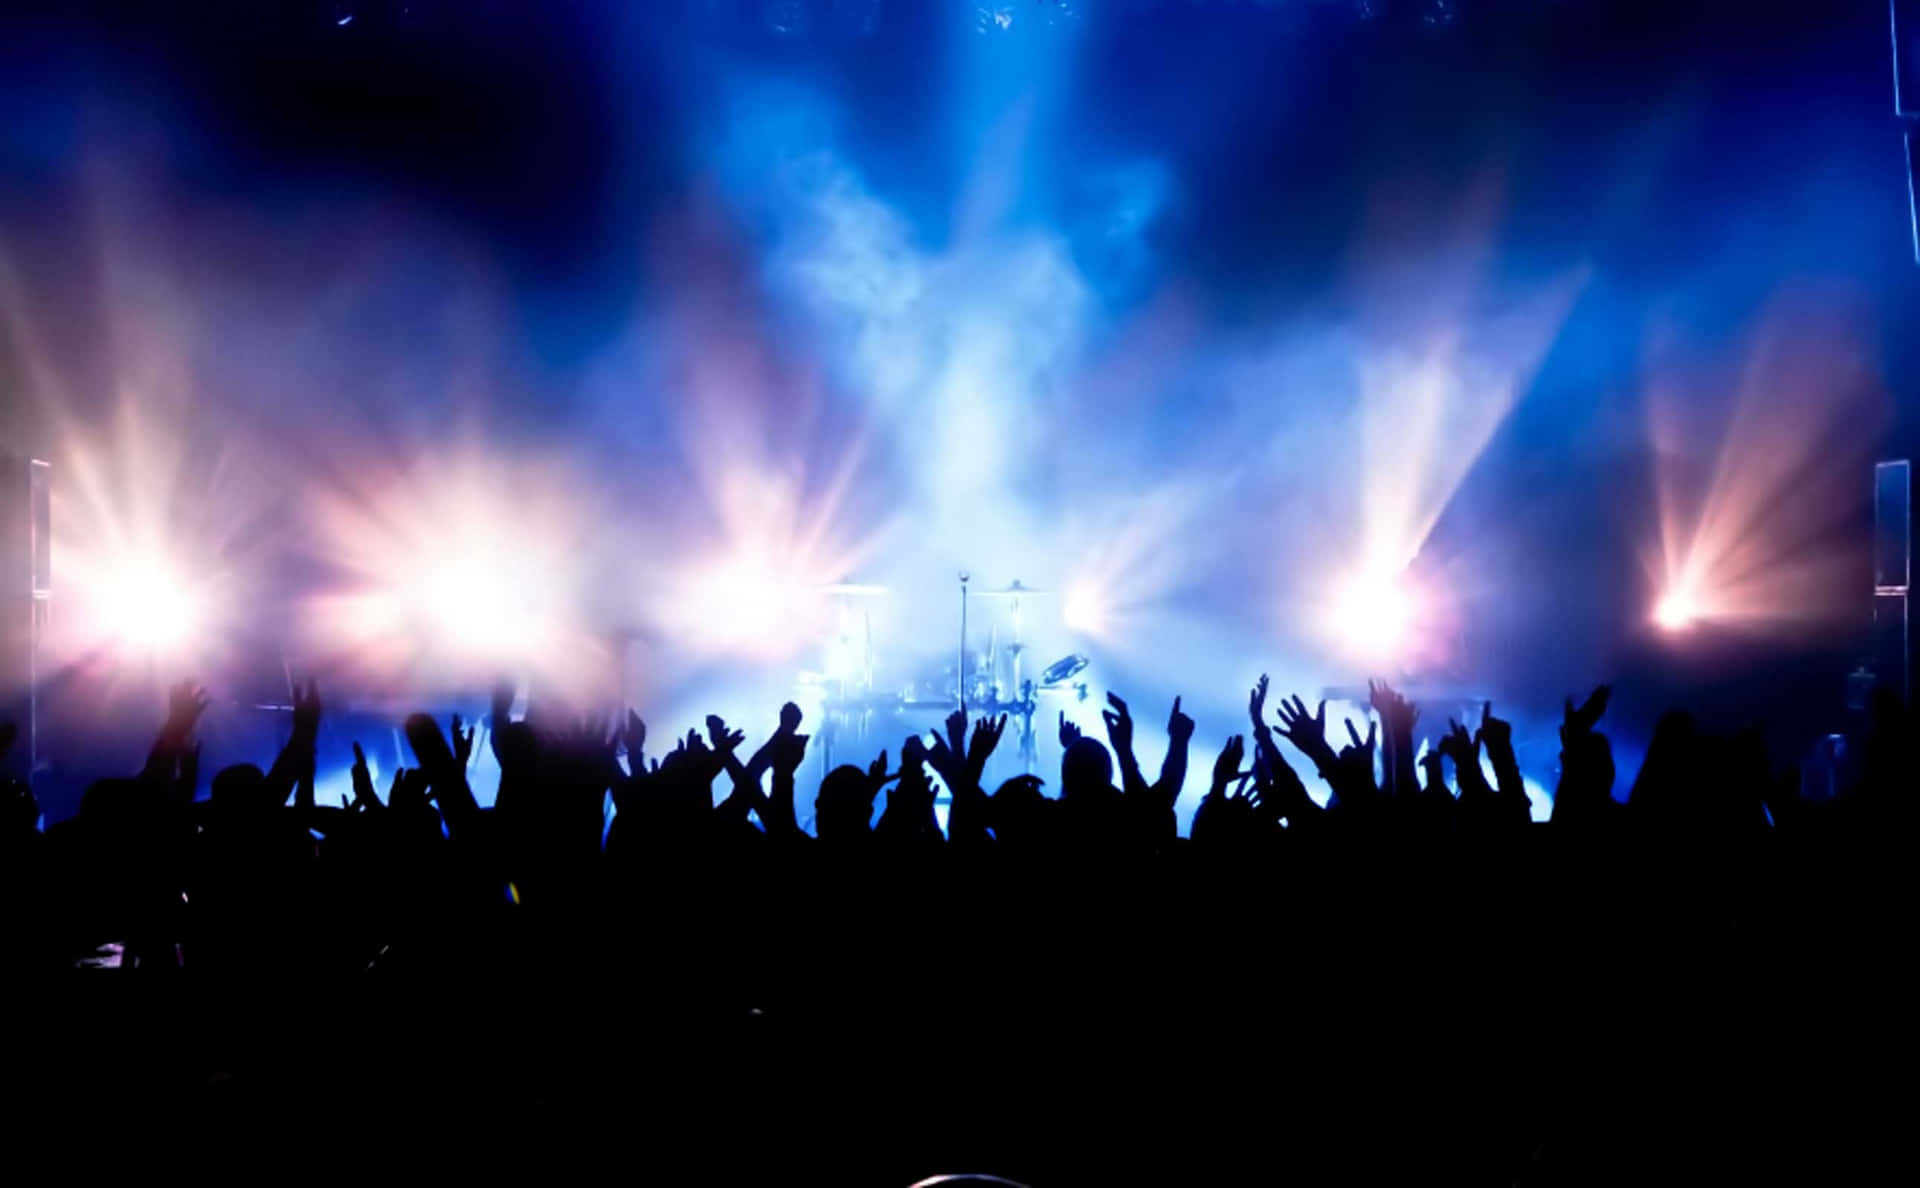 Crowd Silhouette With Stage Lights Concert Background